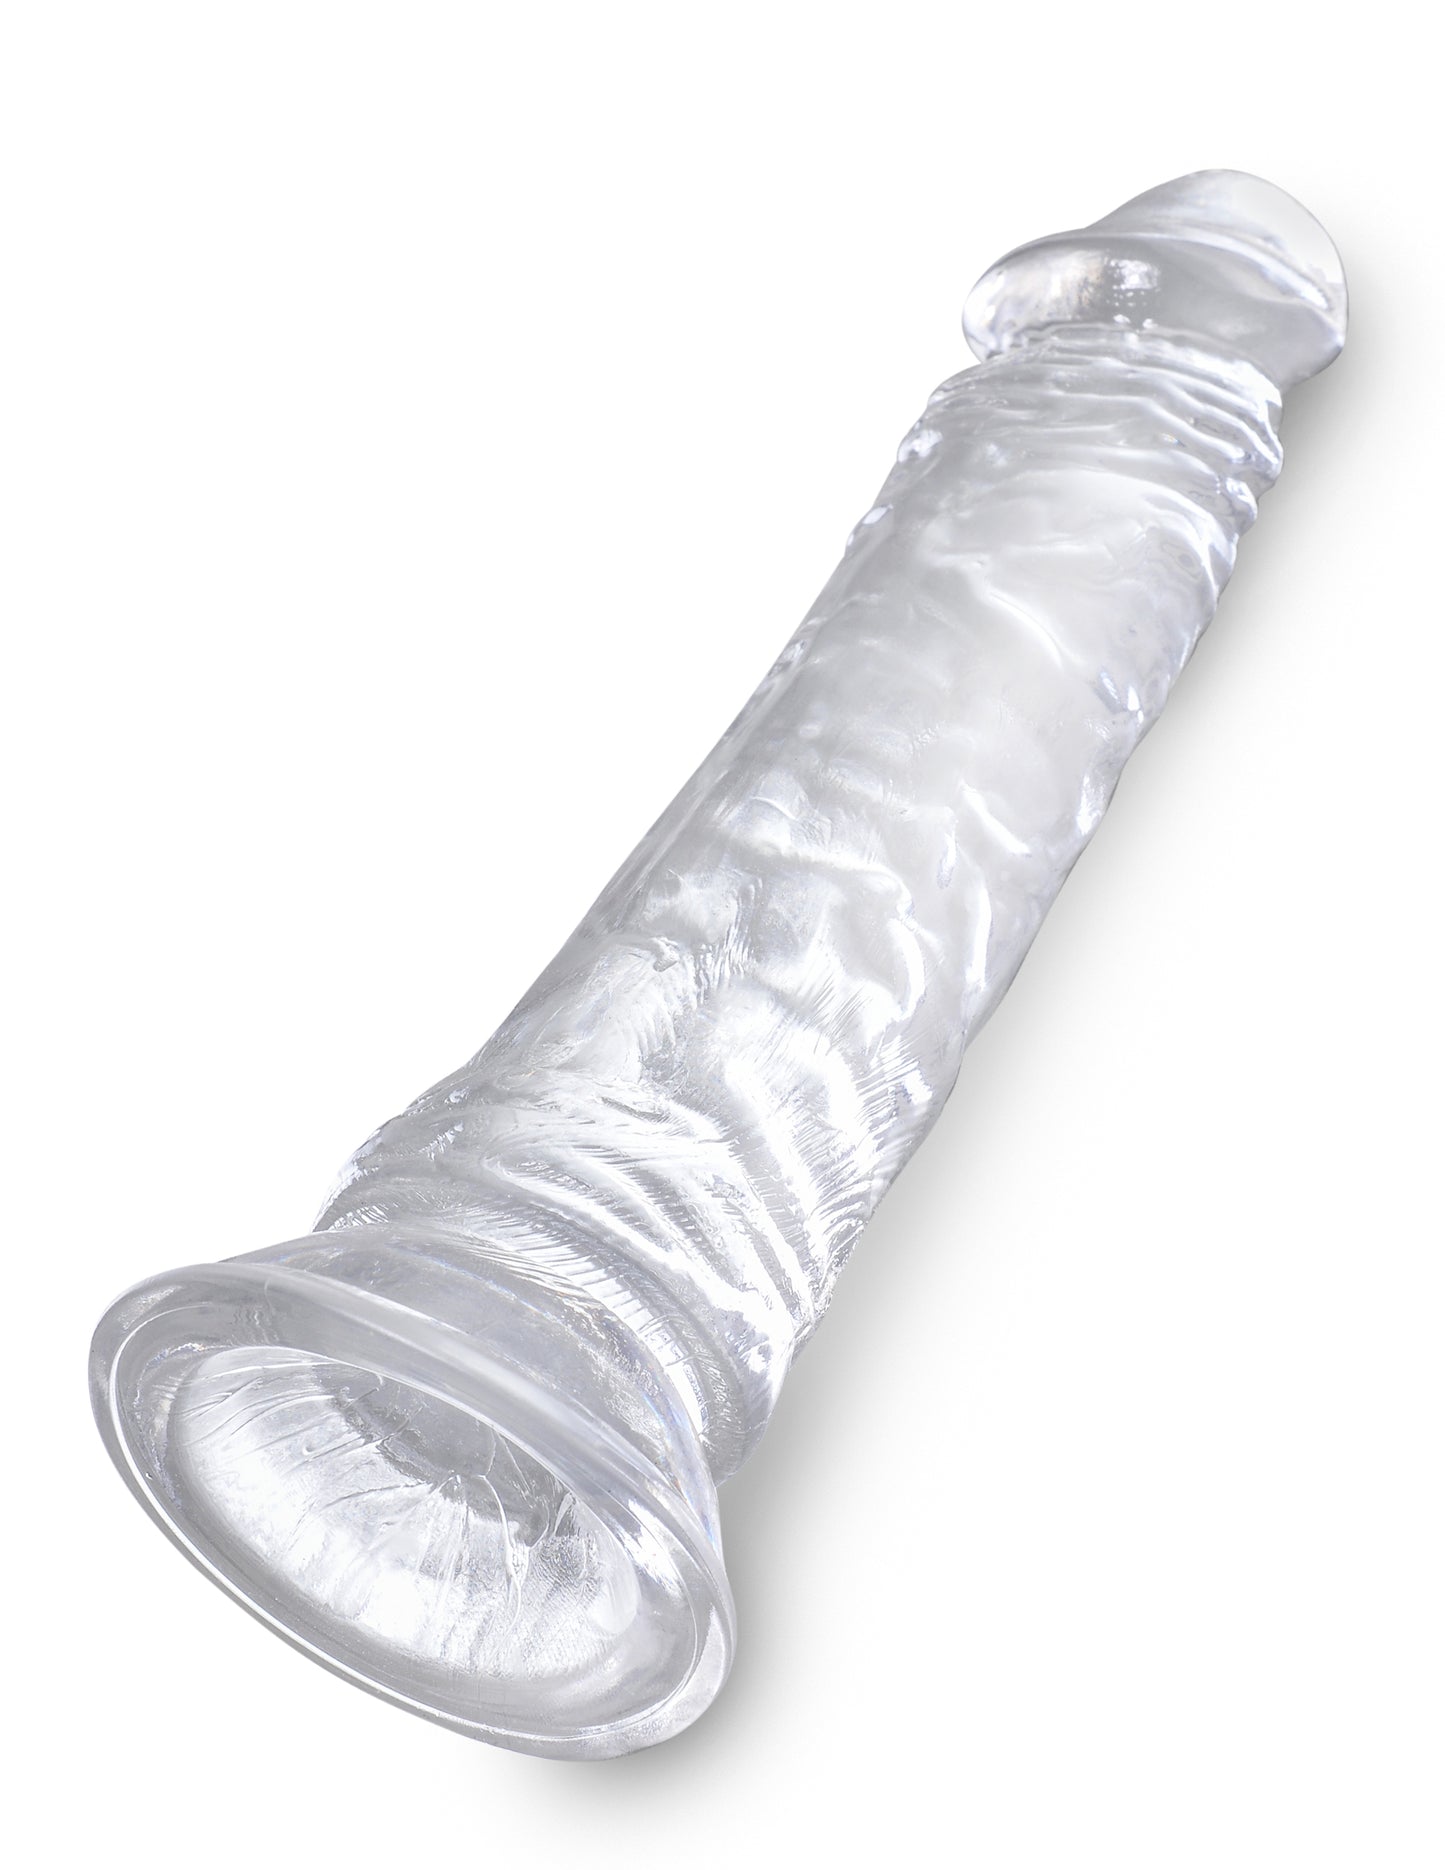 King Cock - 8 inch - Clear